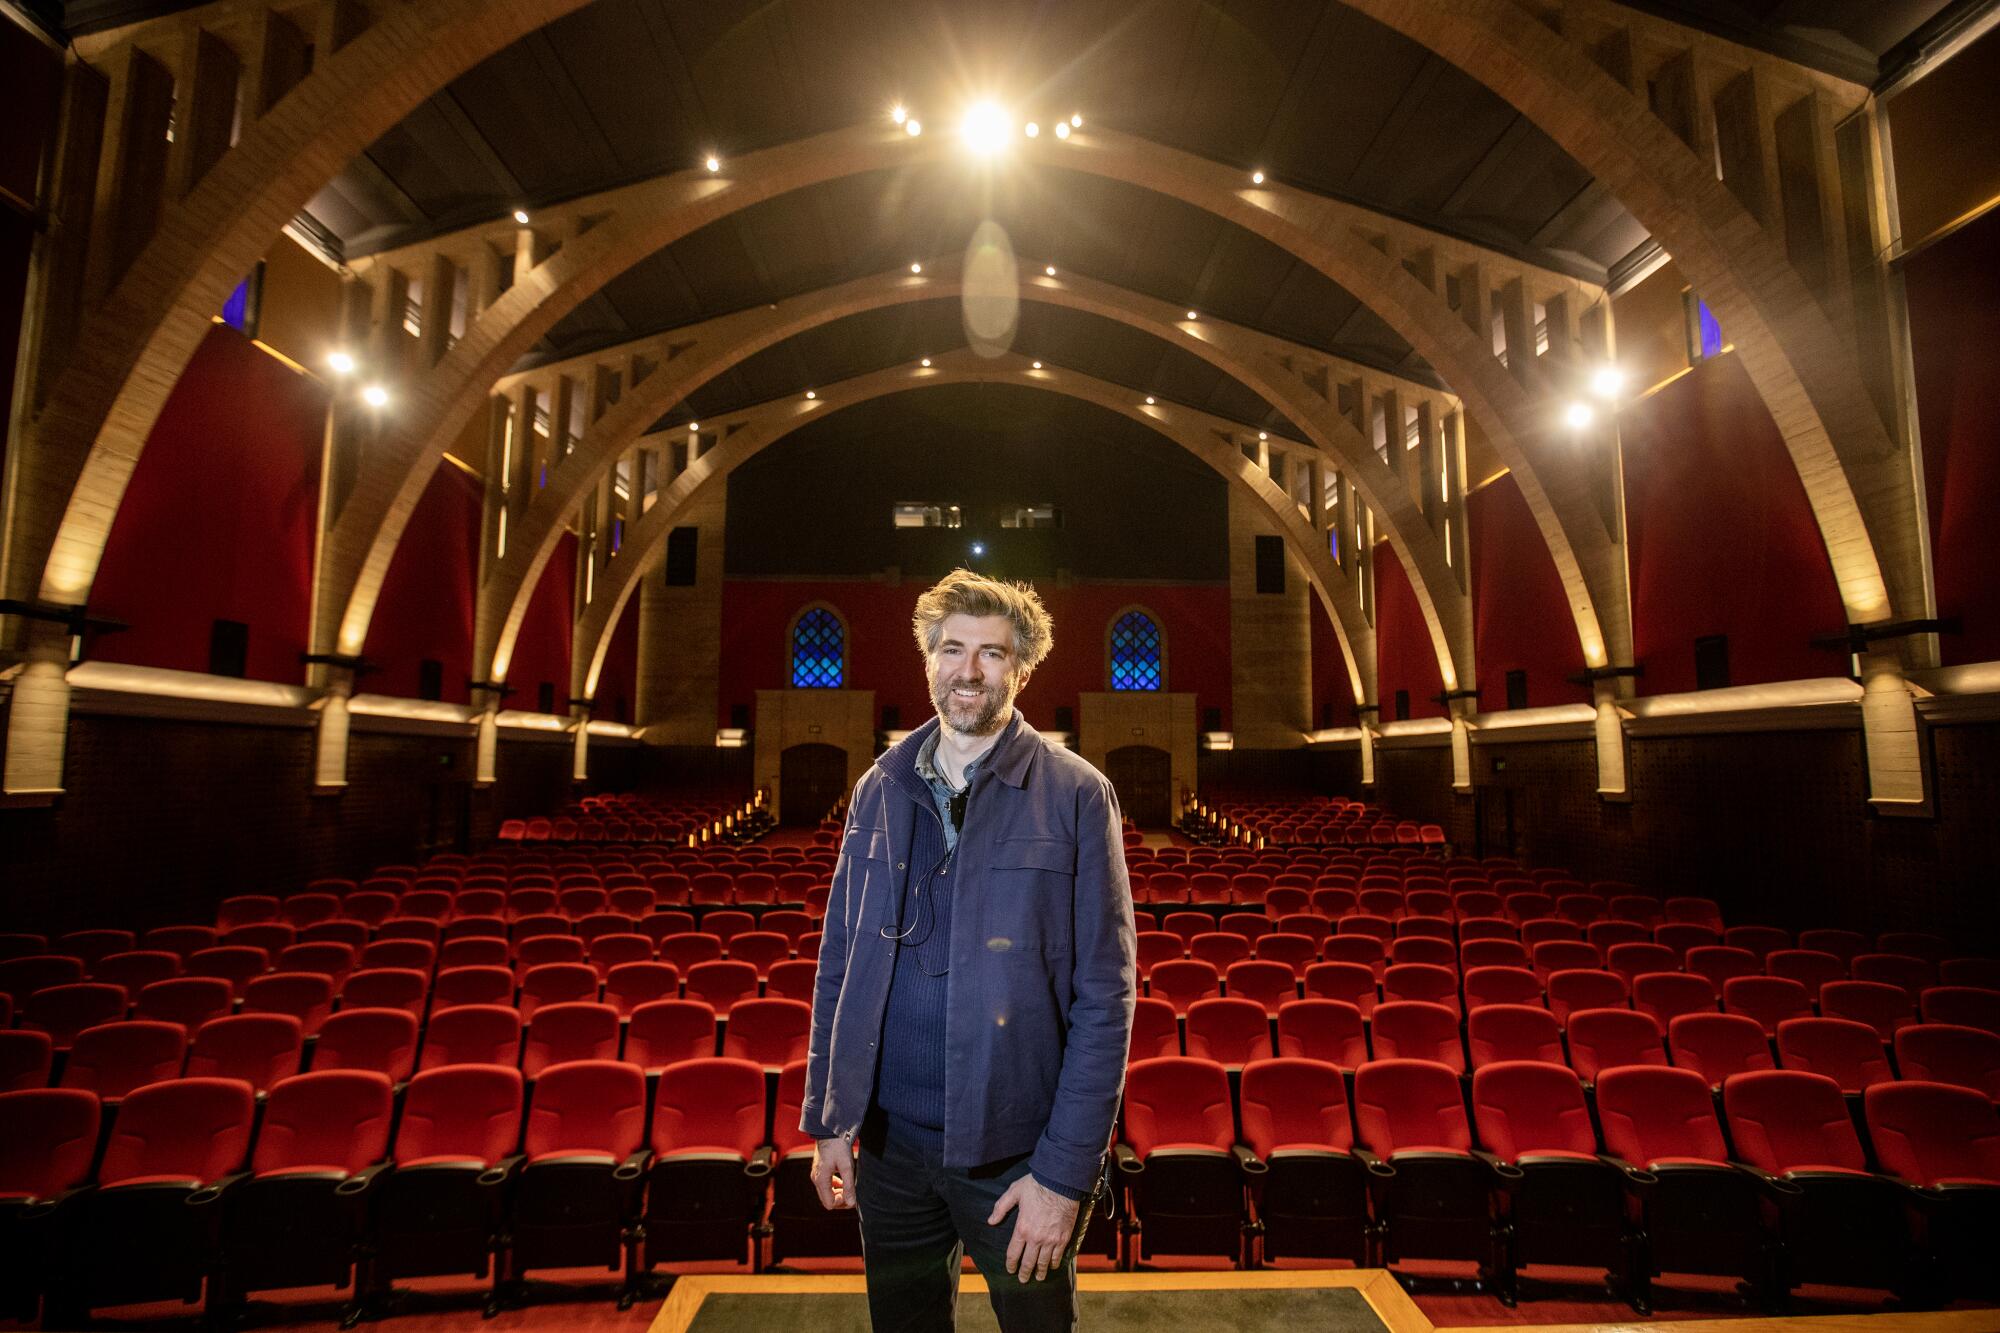 A man stands on a stage in front of rows of red theater seats